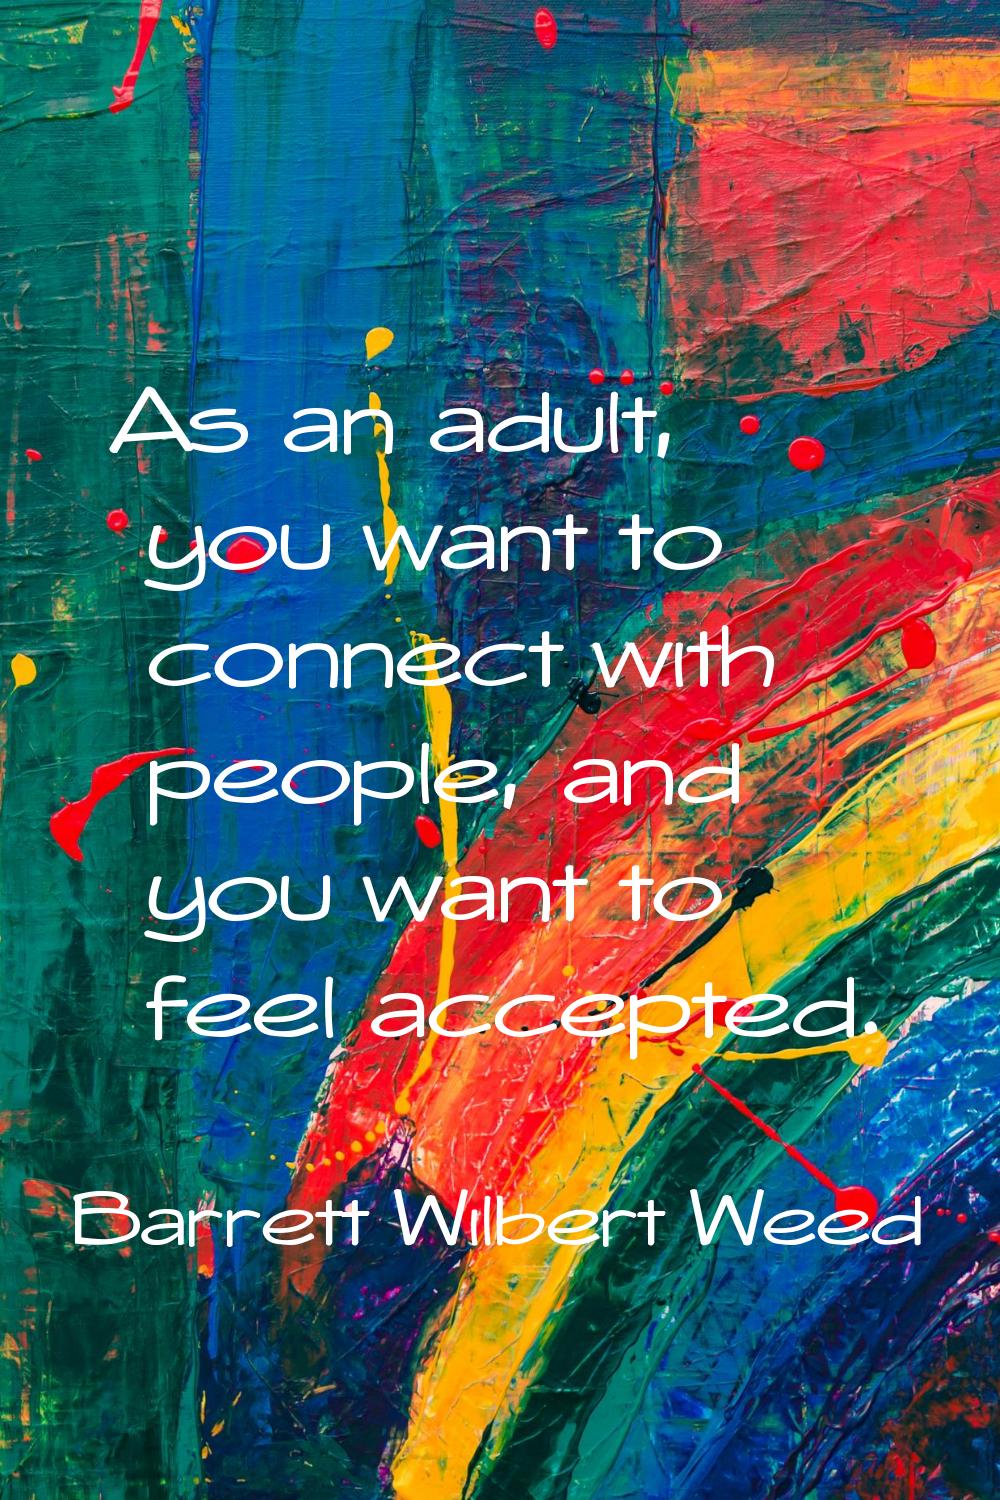 As an adult, you want to connect with people, and you want to feel accepted.